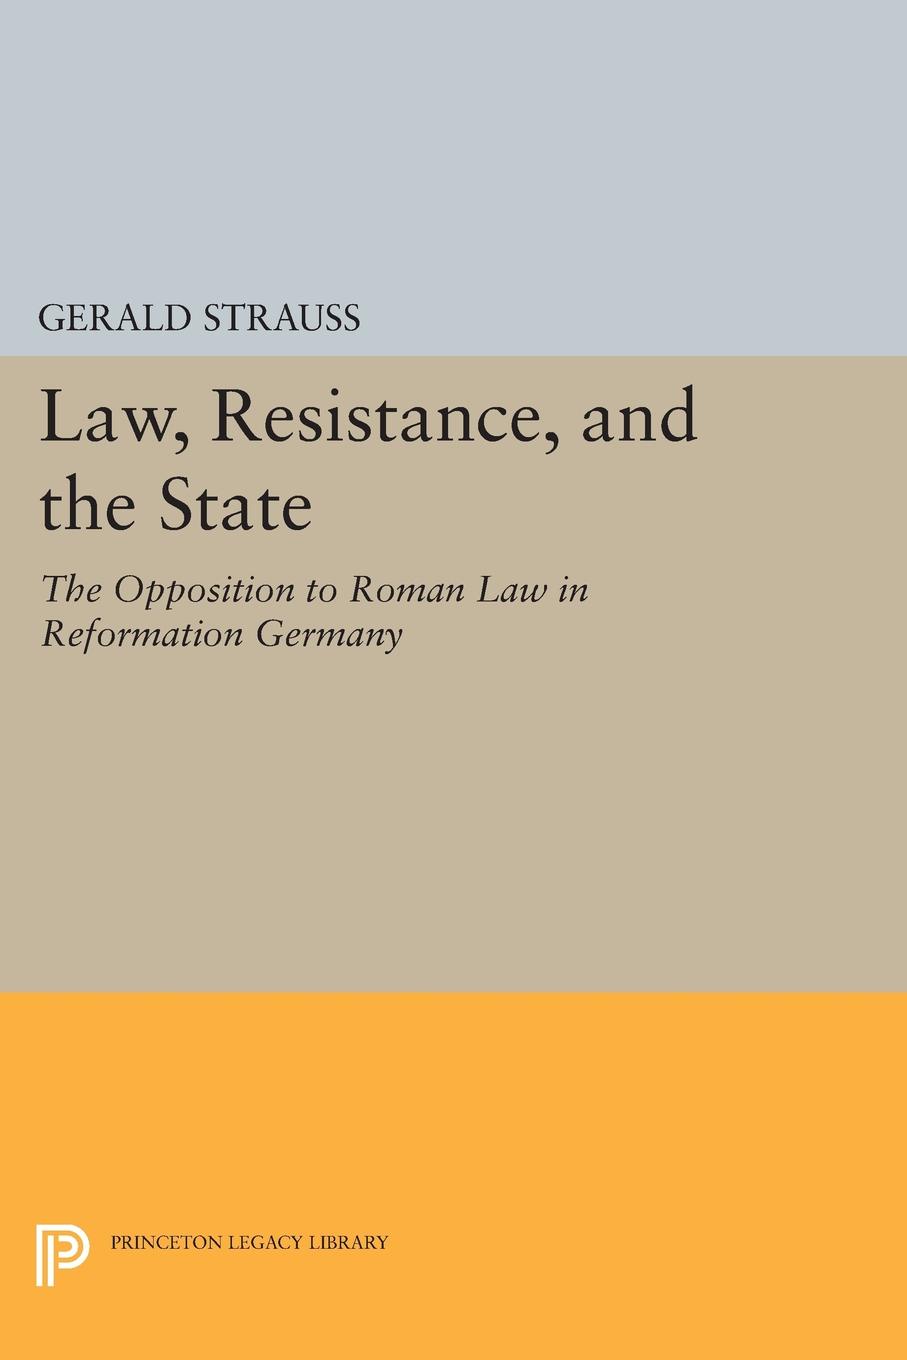 Law, Resistance, and the State. The Opposition to Roman Law in Reformation Germany